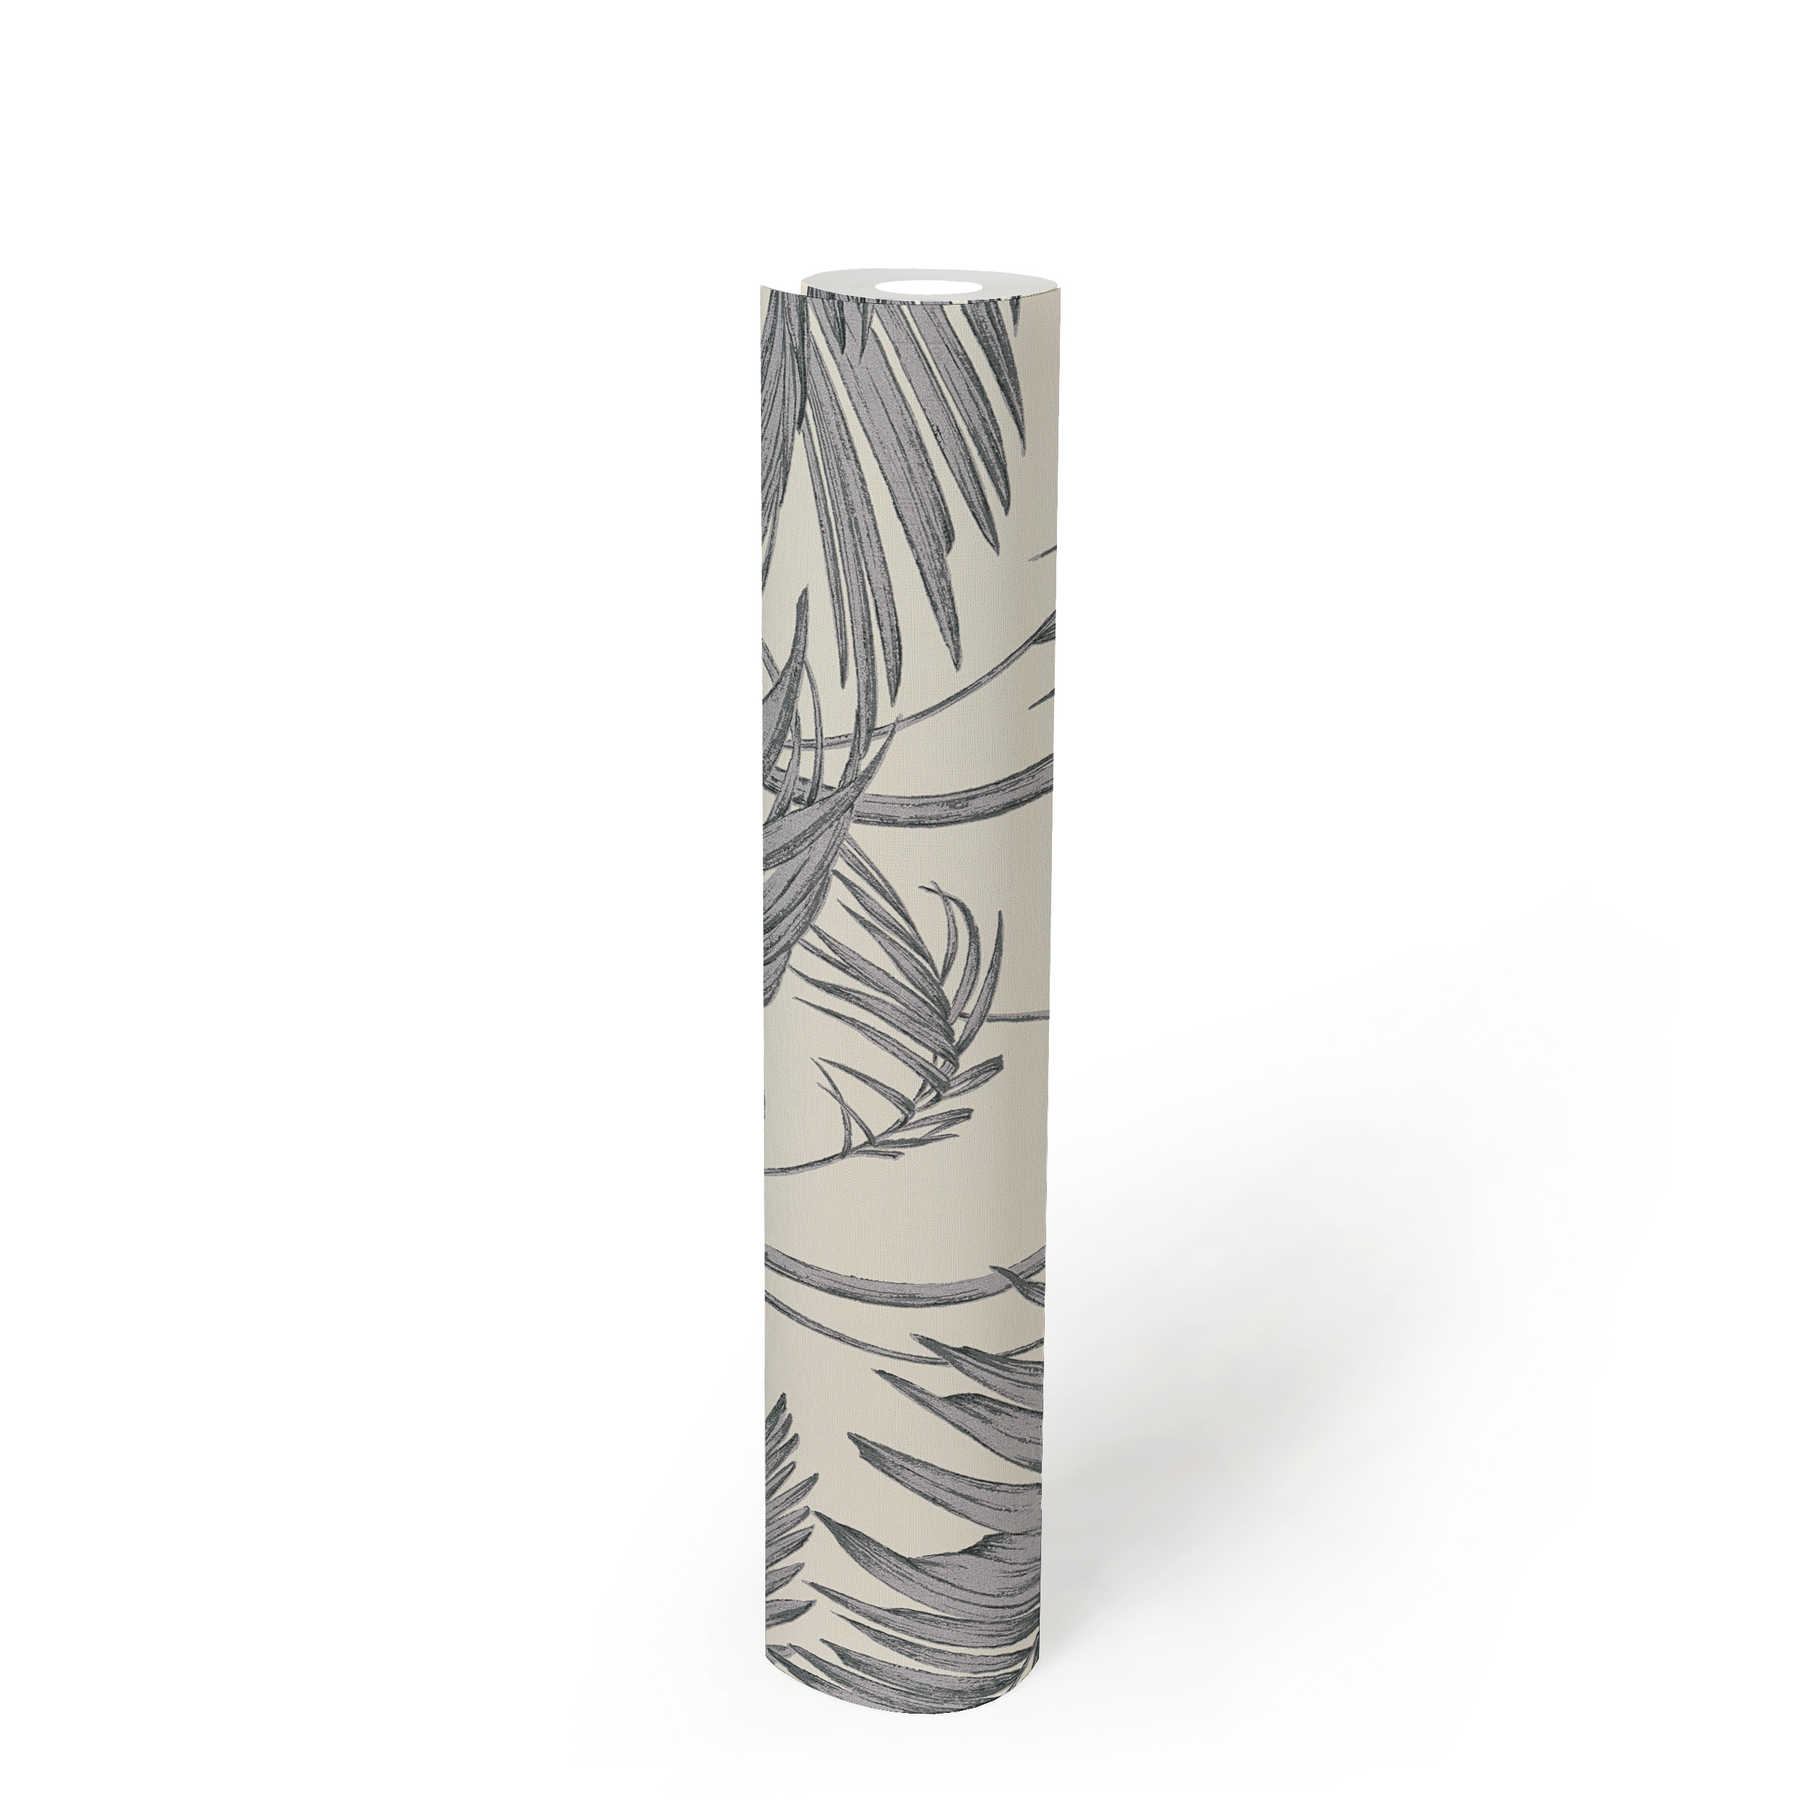             Nature wallpaper palm leaves, bamboo - grey, silver, white
        